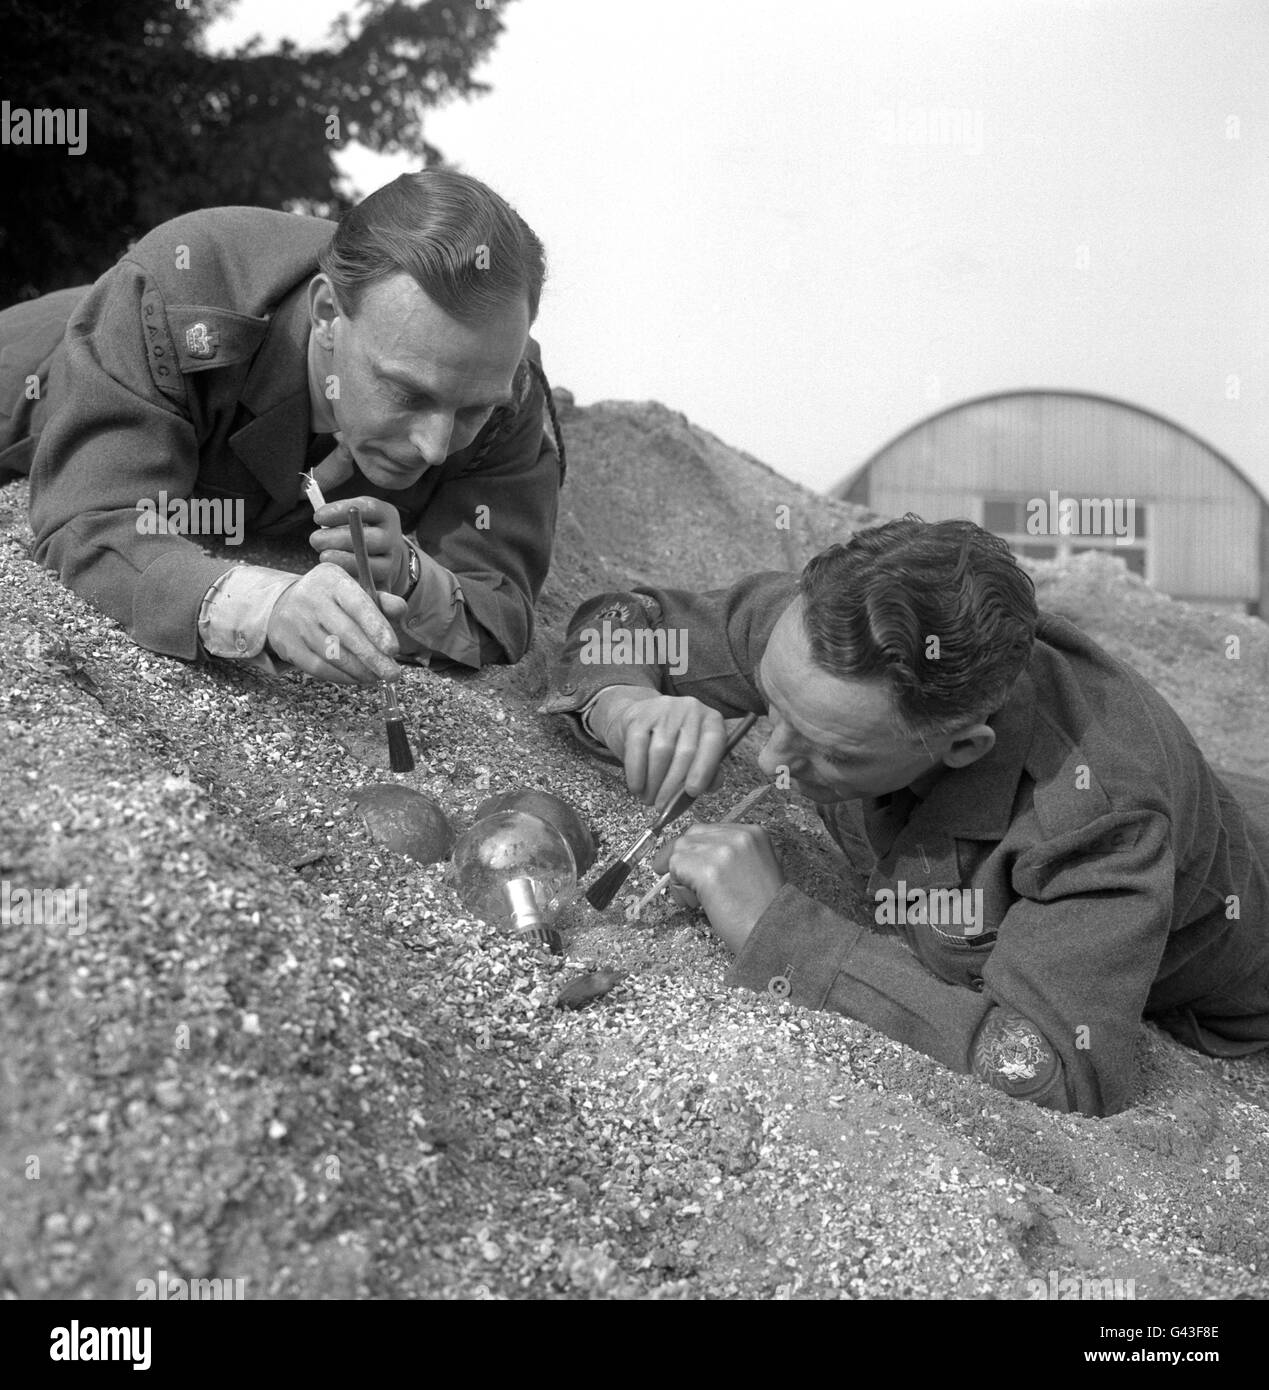 Major William Musson (left), and Warrant Officer I (Conductor) Sidney Brazier, who have been awarded the George Medal for bravery in bomb disposal work, recreate the circumstances that led to their award, as they disarm a 'sticky-bomb'. Stock Photo